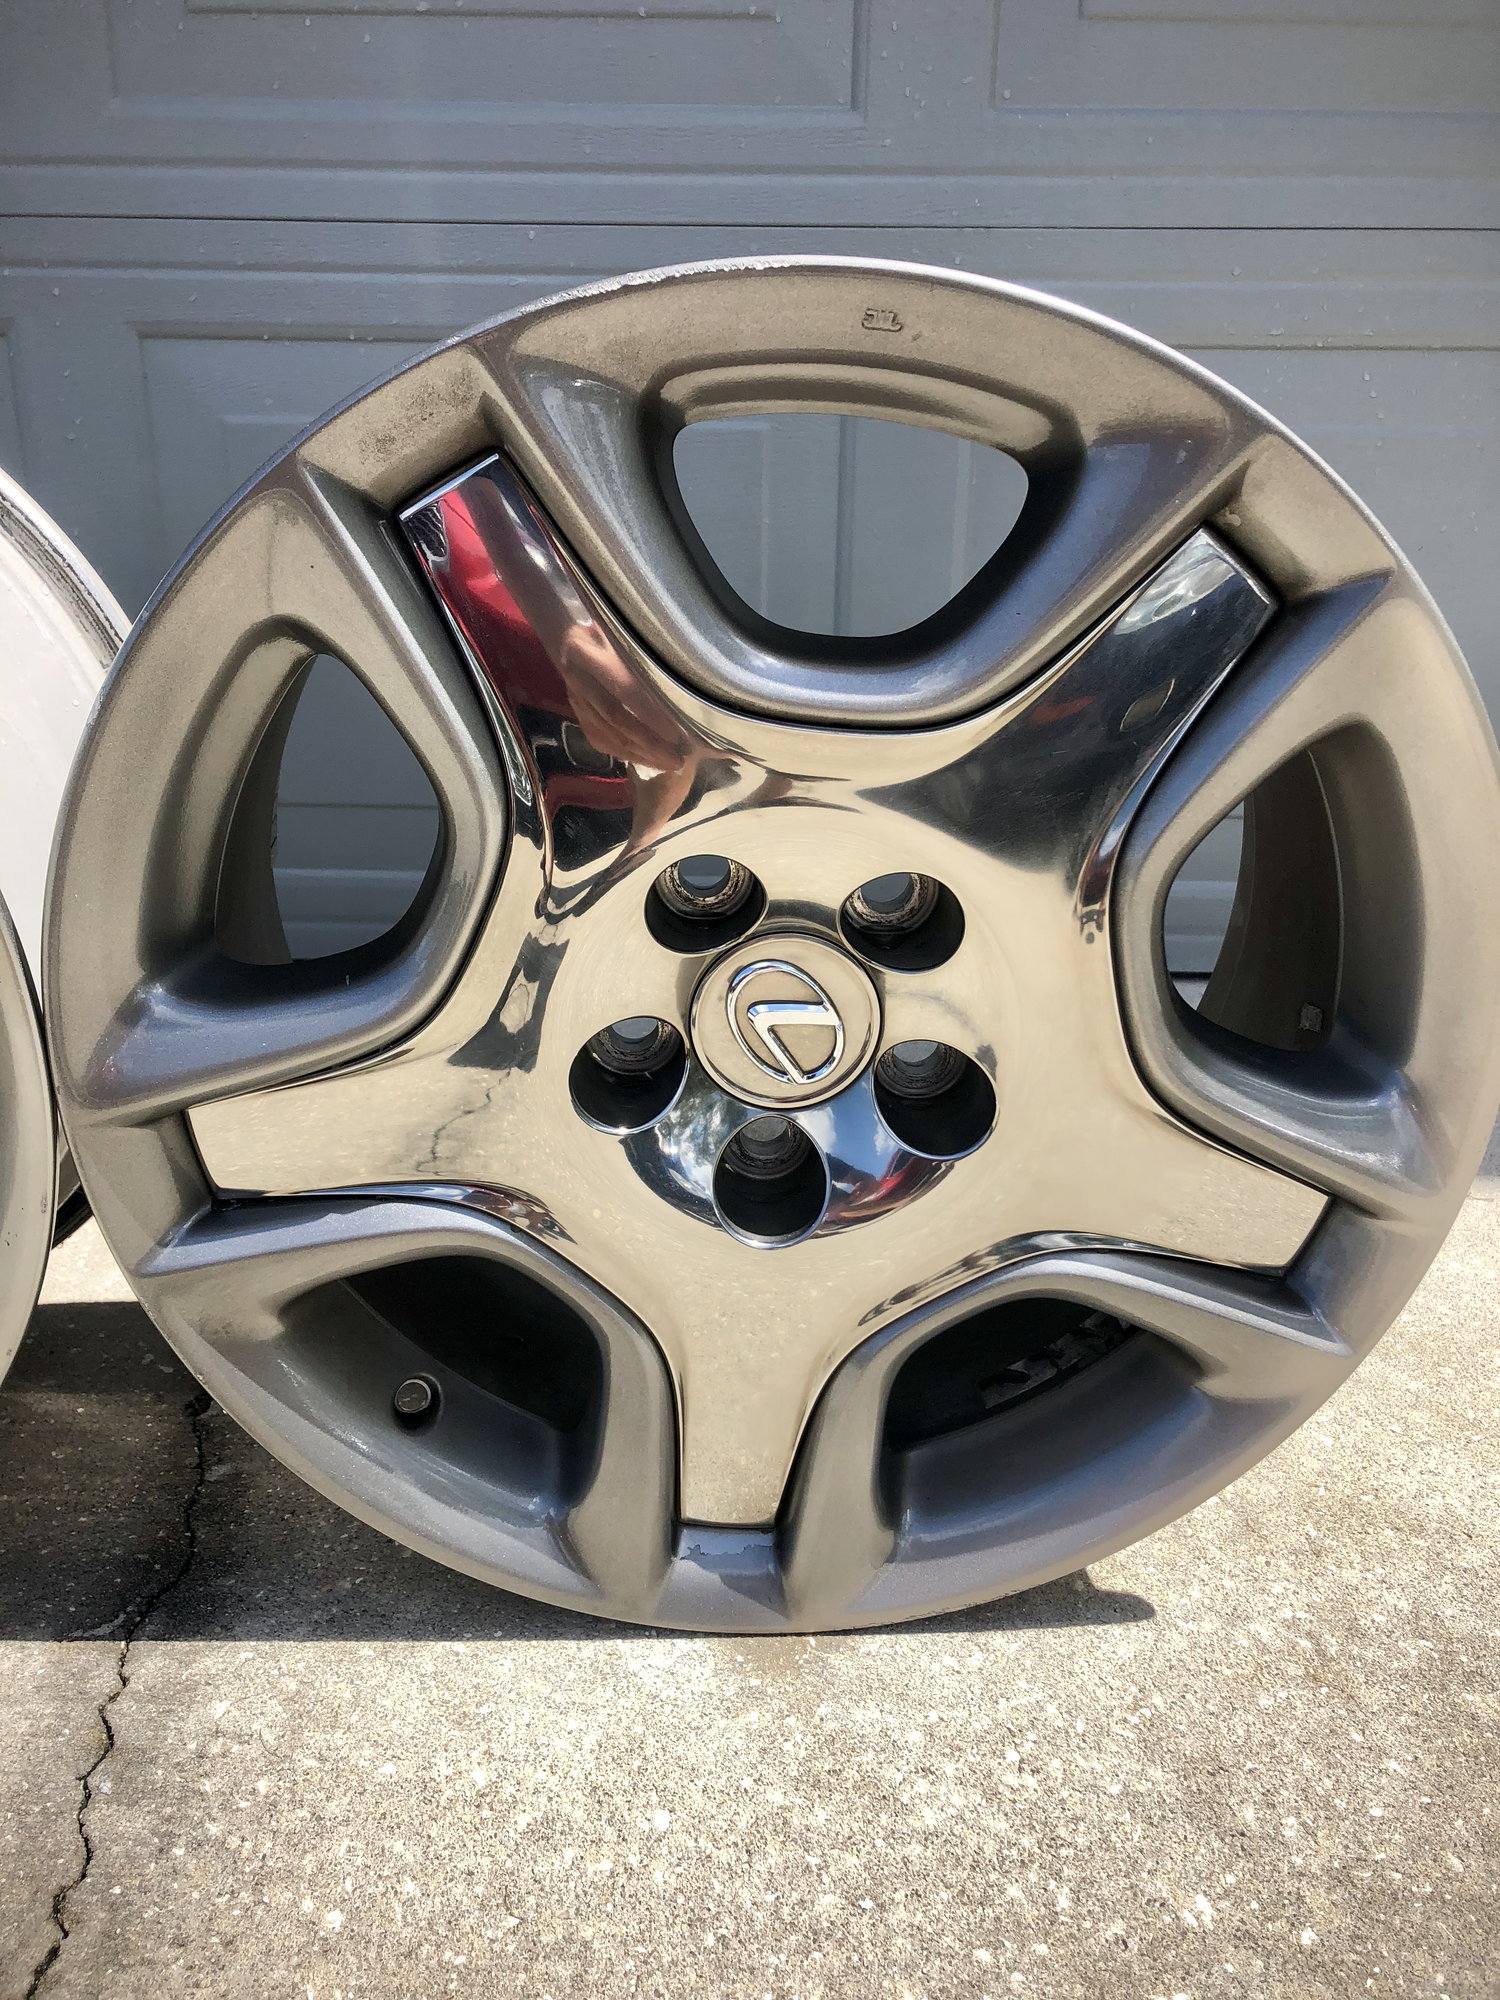 Wheels and Tires/Axles - 2007 SC430 OEM Wheels 29k Miles - Used - 2002 to 2010 Lexus SC430 - Rockledge, FL 32955, United States